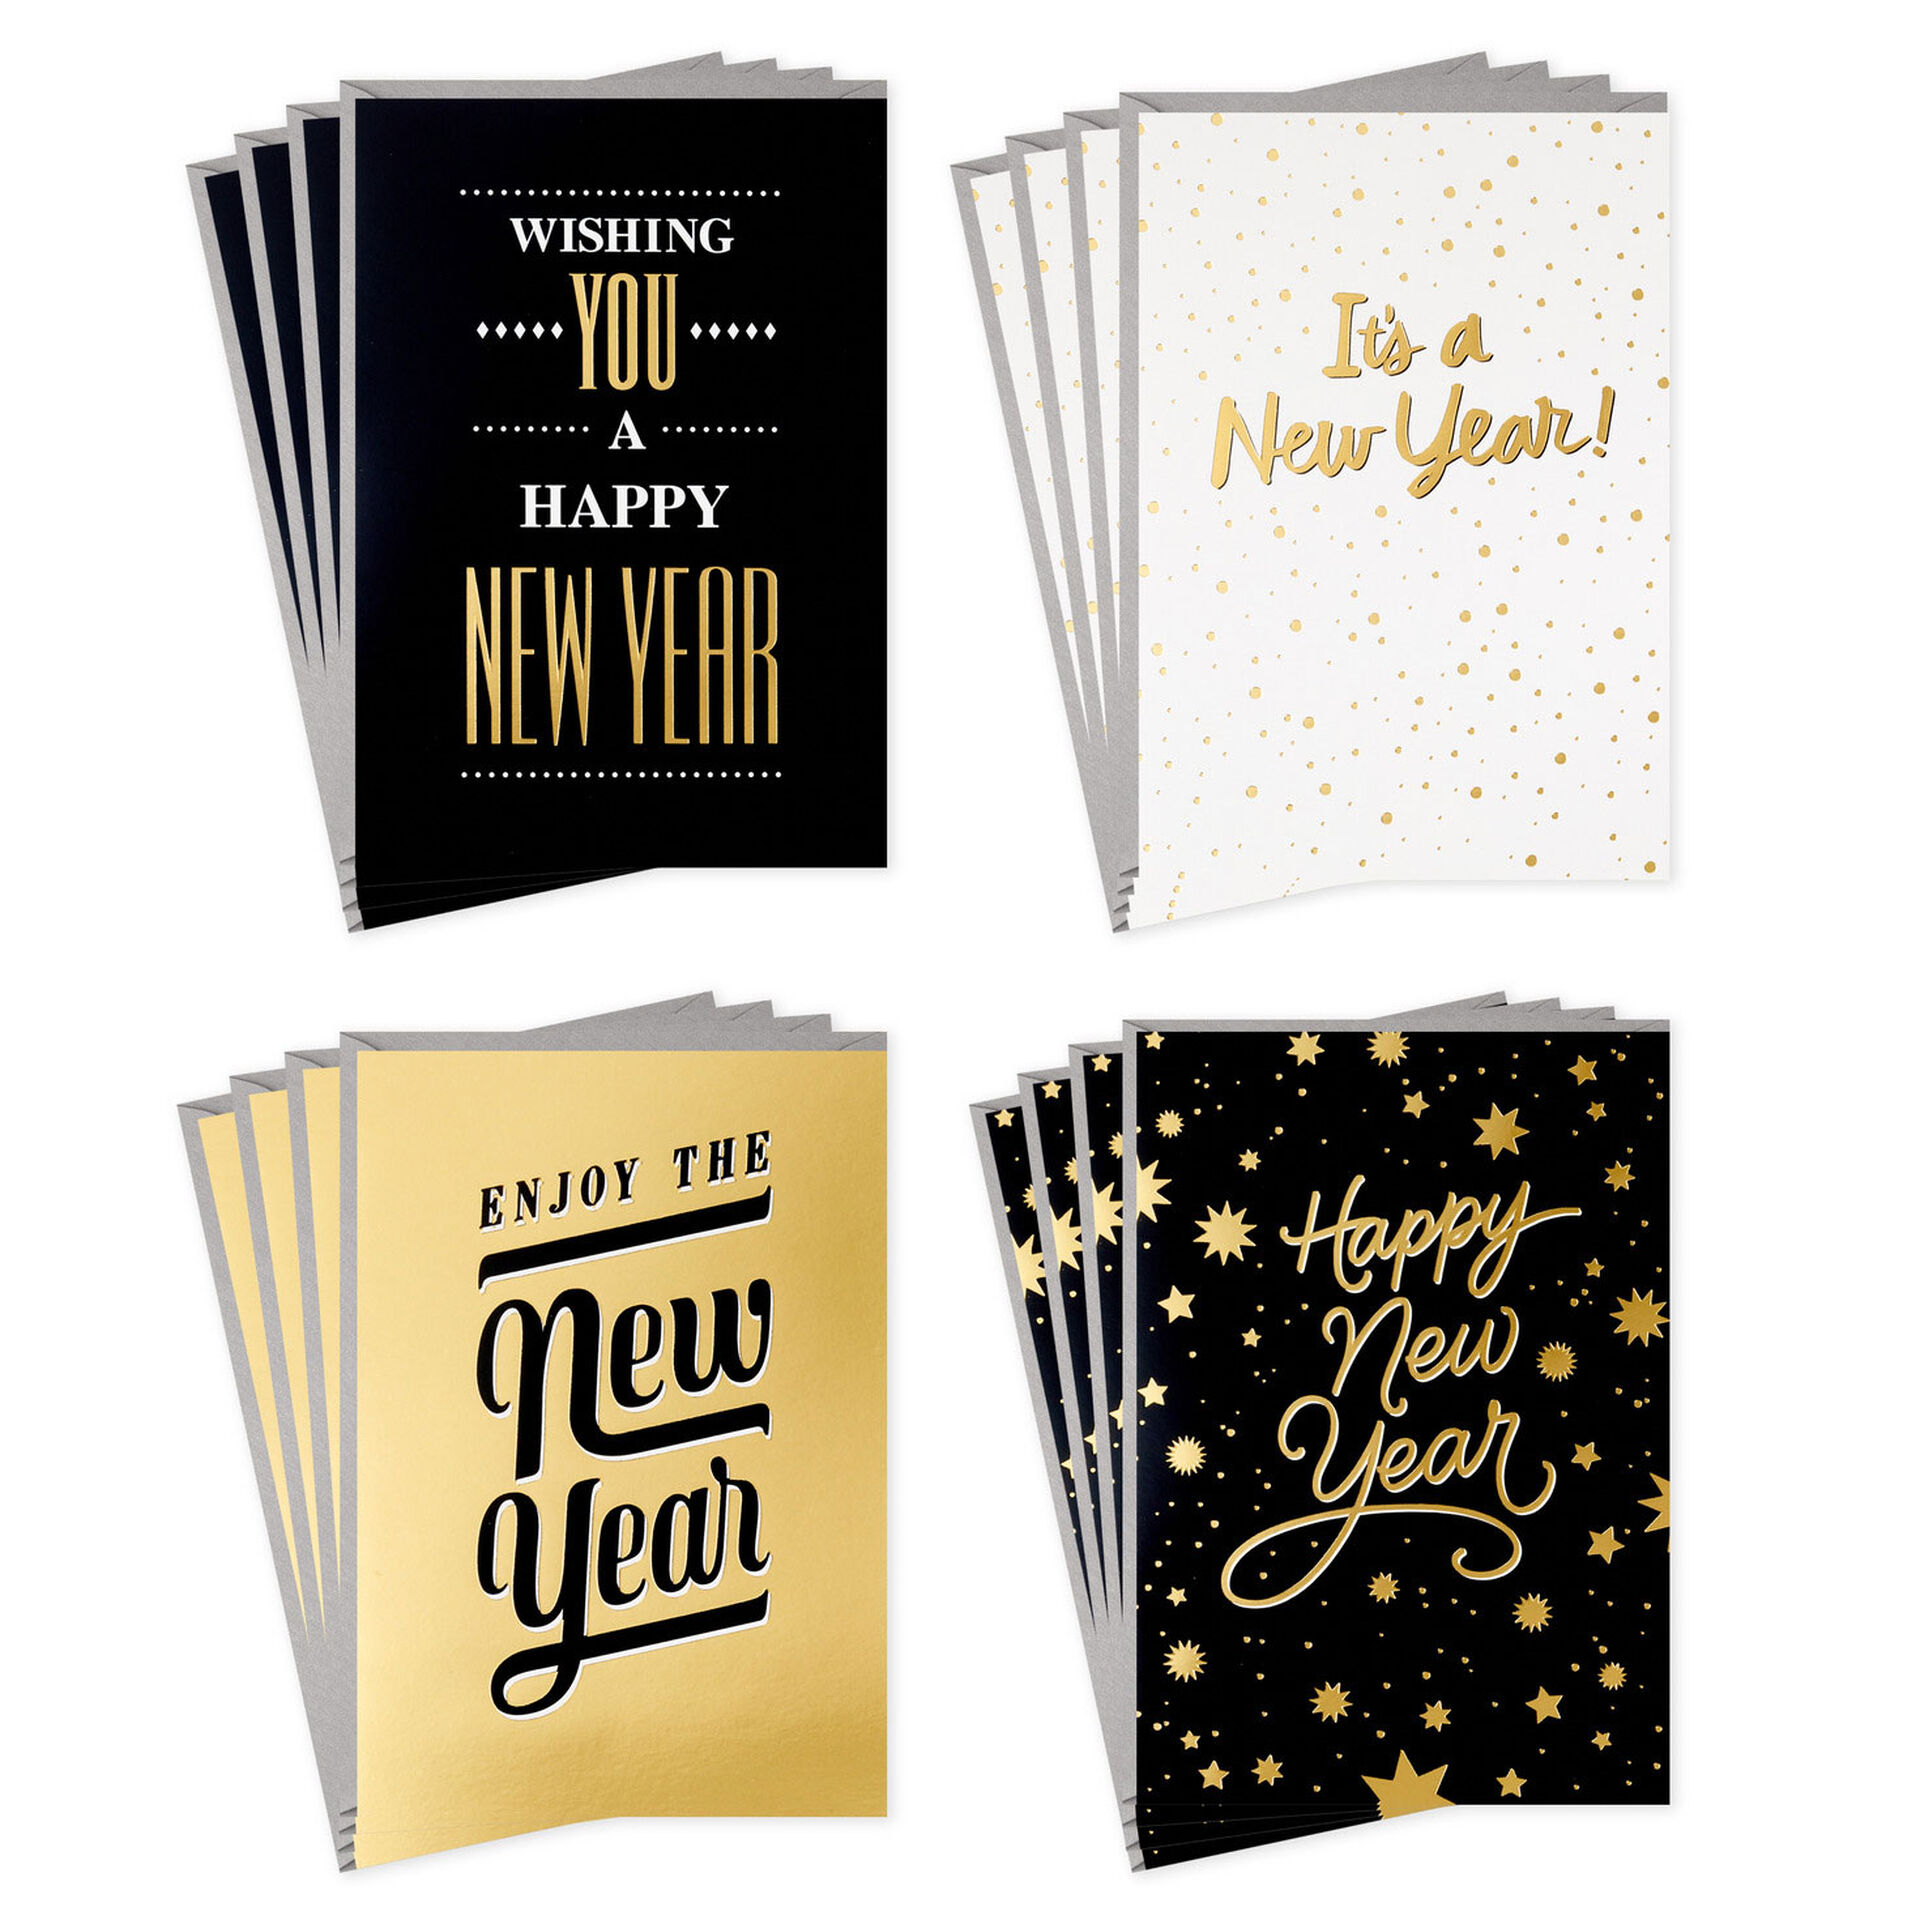 Shining Celebration Boxed New Year's Cards Assortment, Pack of 16